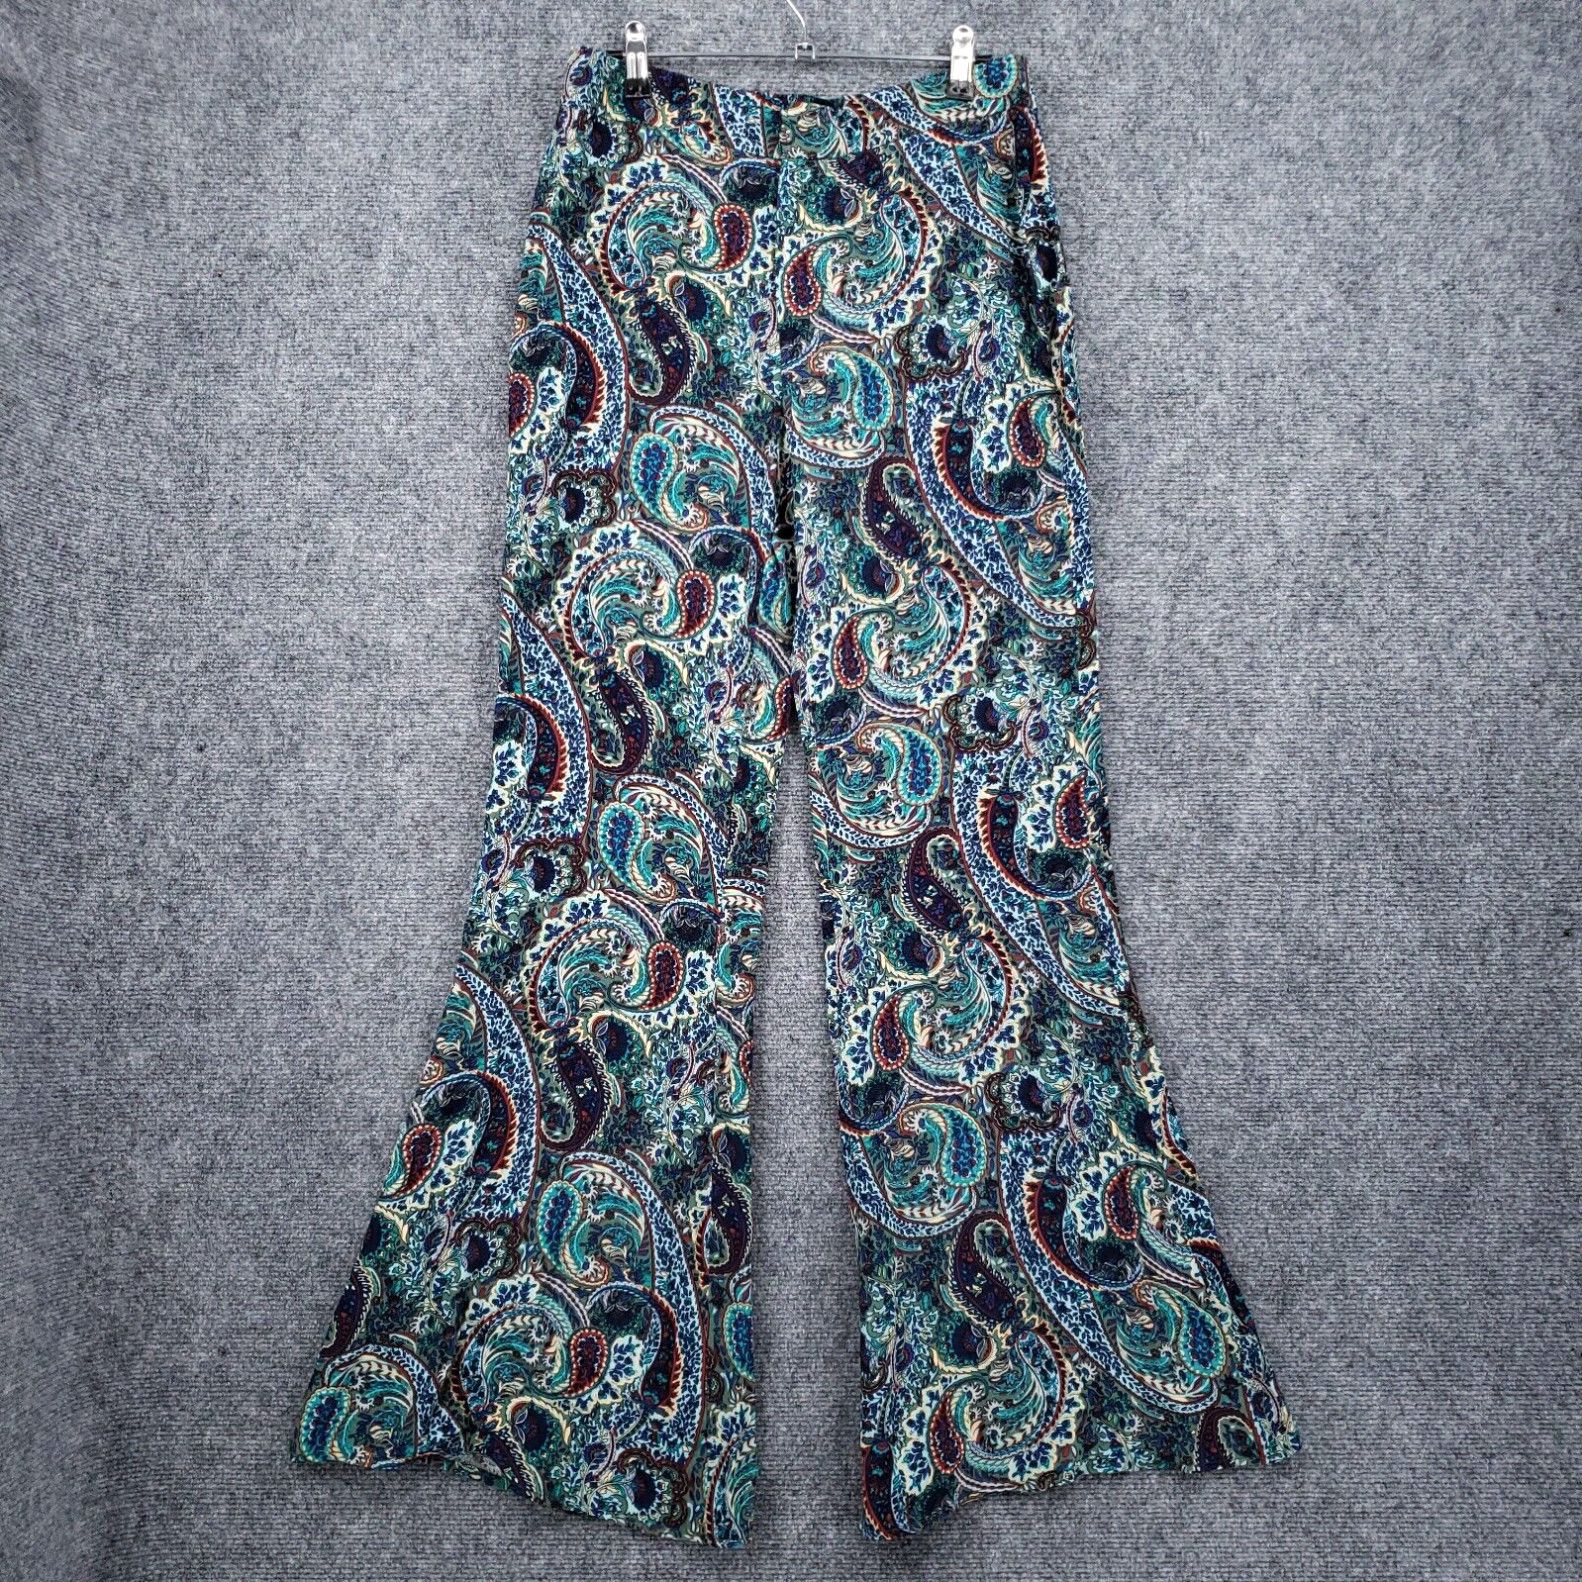 Zara Zara Pants Womens S Small Green Floral Paisley Flared Hi Rise Bell Bottom 90s Size ONE SIZE - 1 Preview